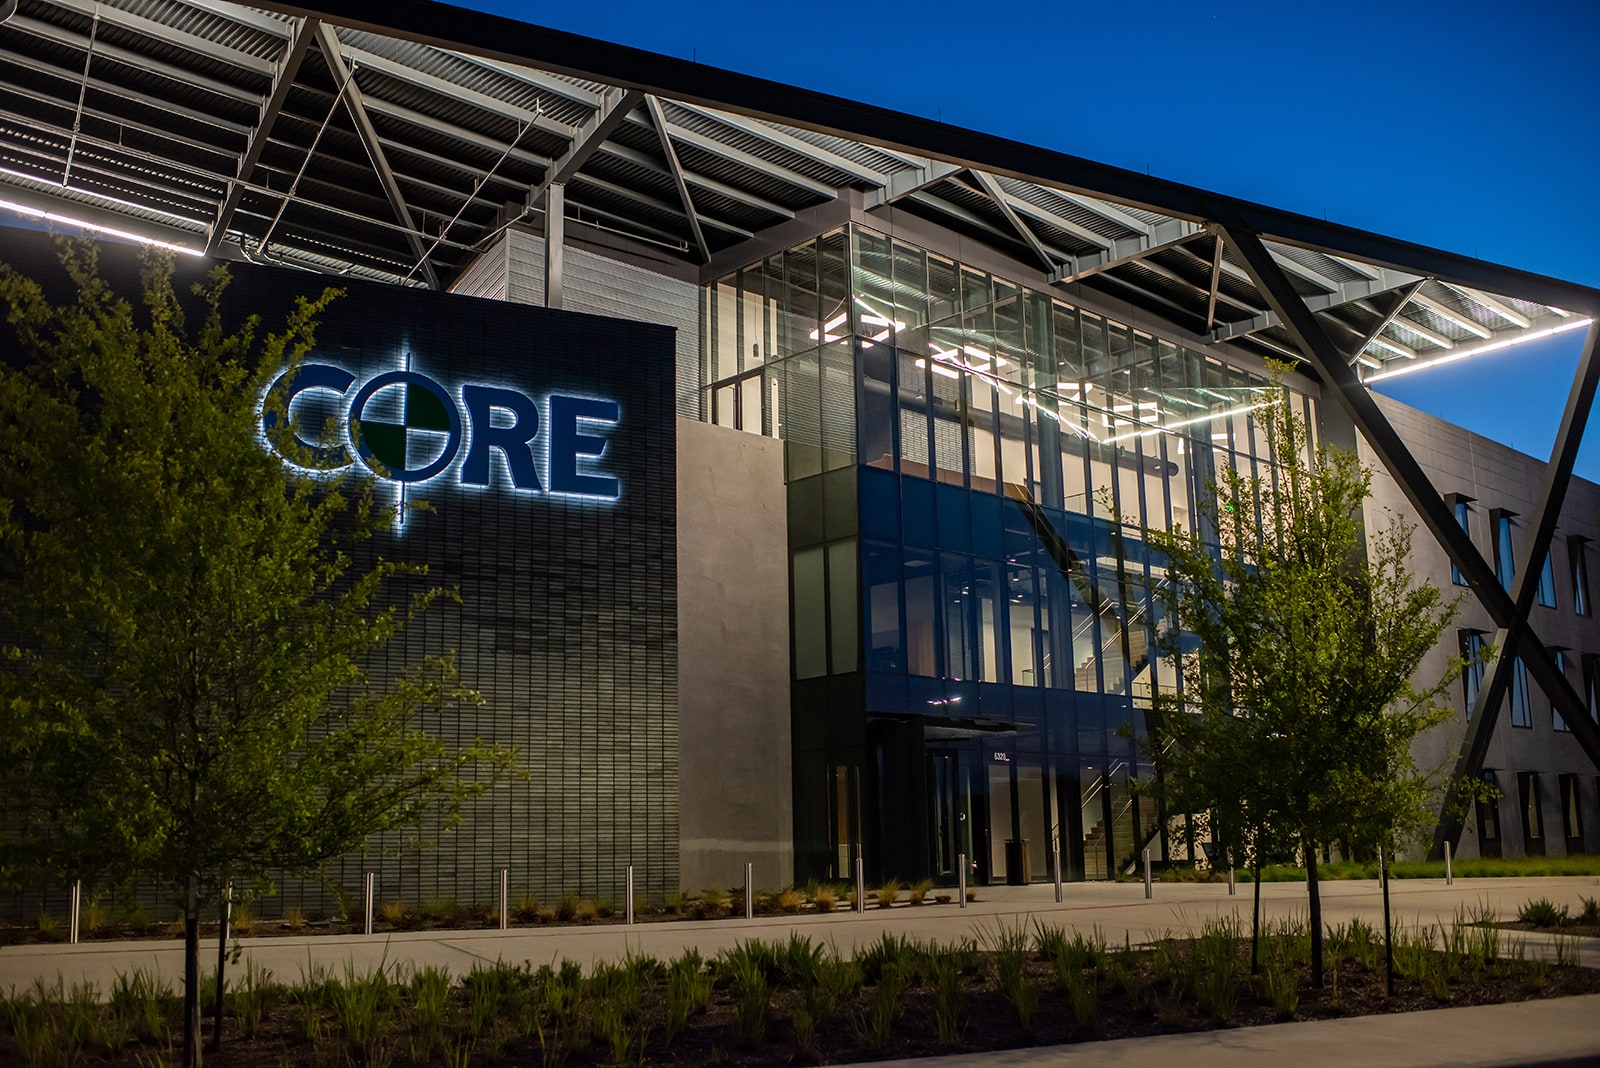 Front of the CORE Construction headquarters building at night.